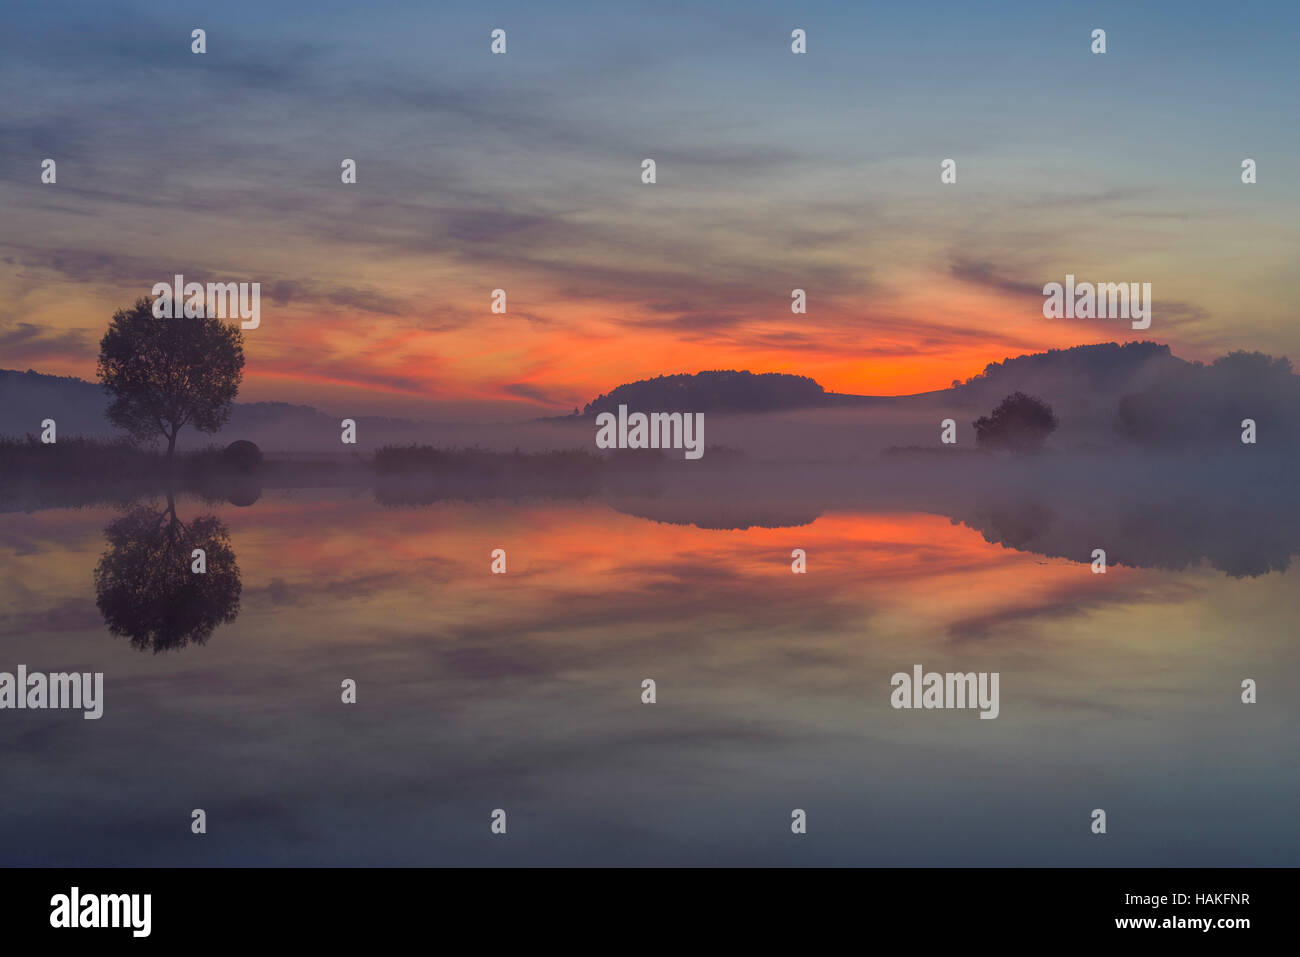 Landscape with Tree Reflecting in Lake at Dawn, Drei Gleichen, Ilm District, Thuringia, Germany Stock Photo